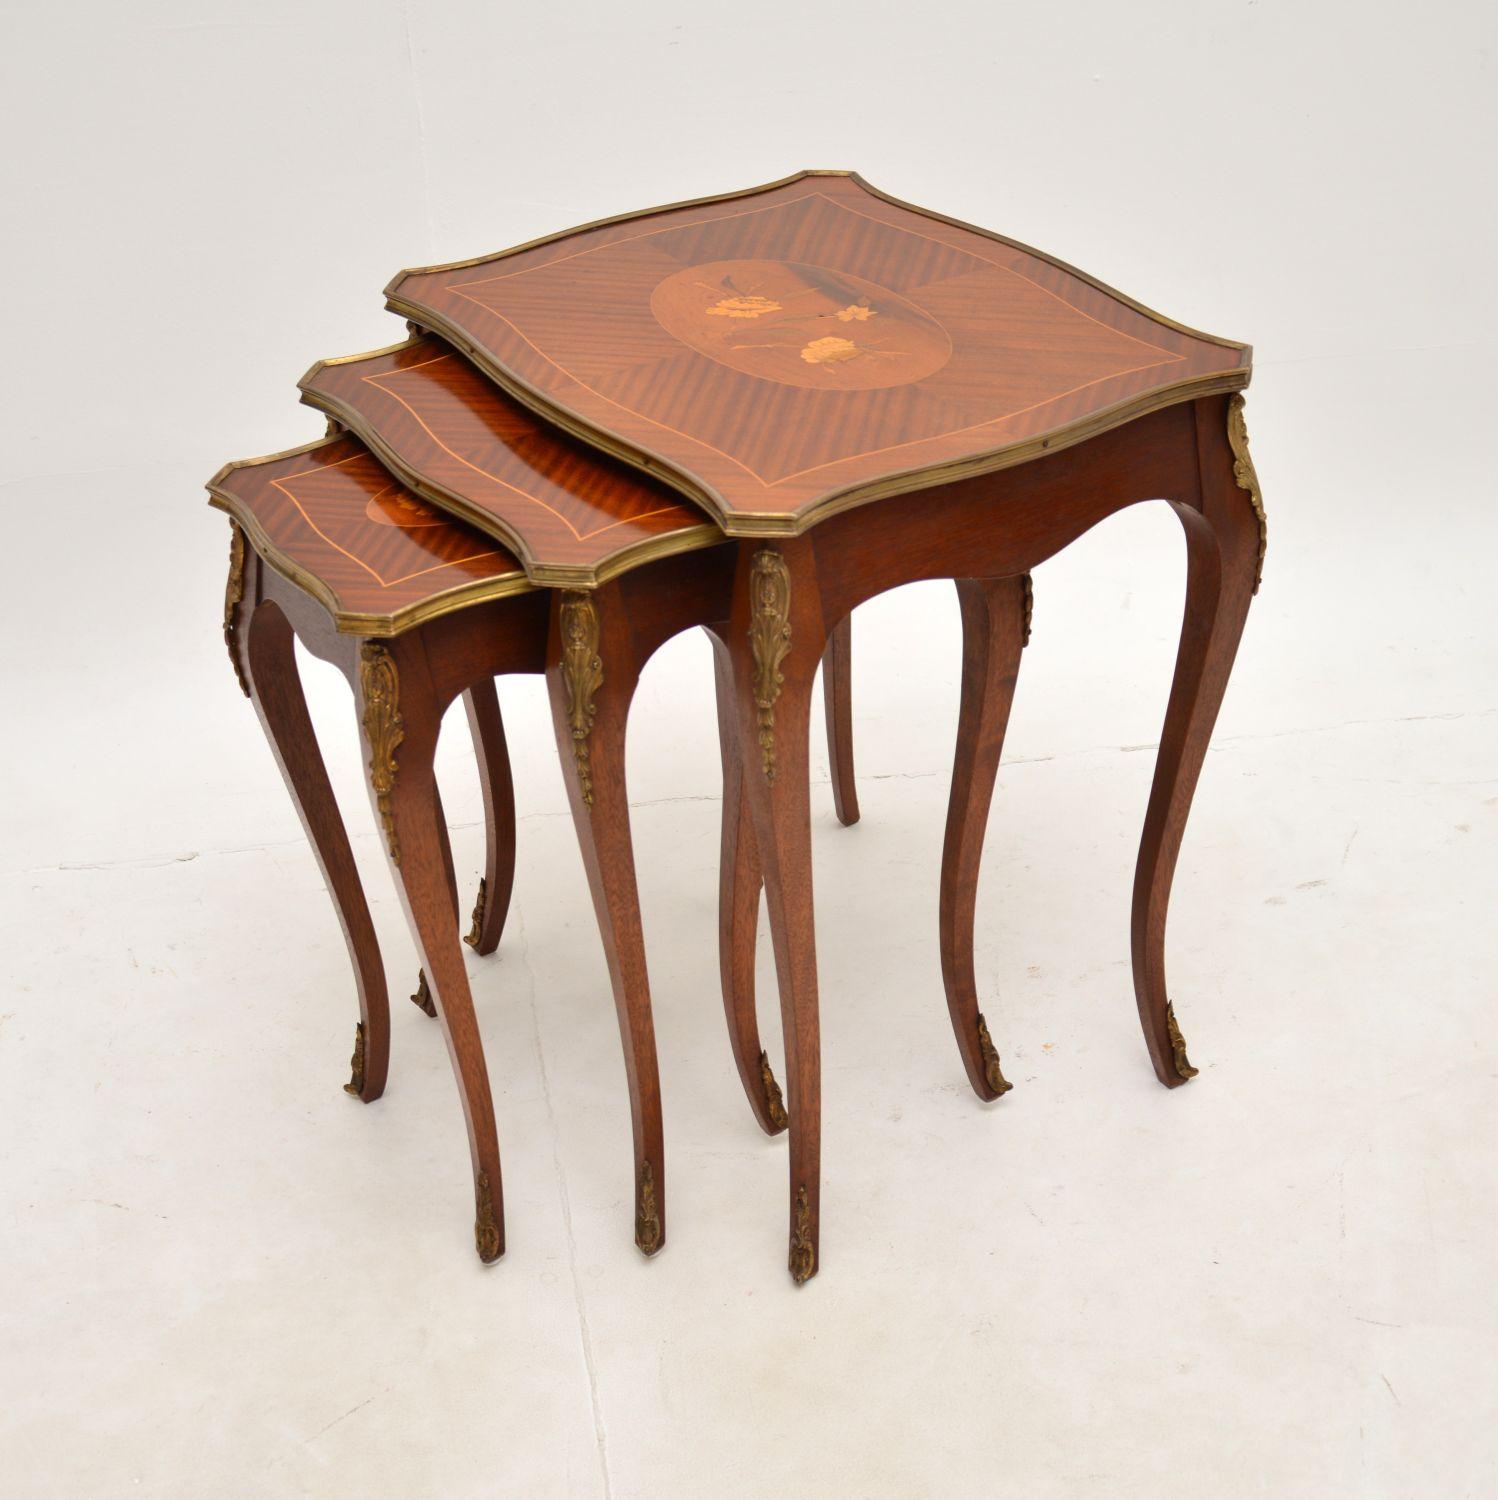 Antique French Inlaid Nest of Tables In Good Condition For Sale In London, GB